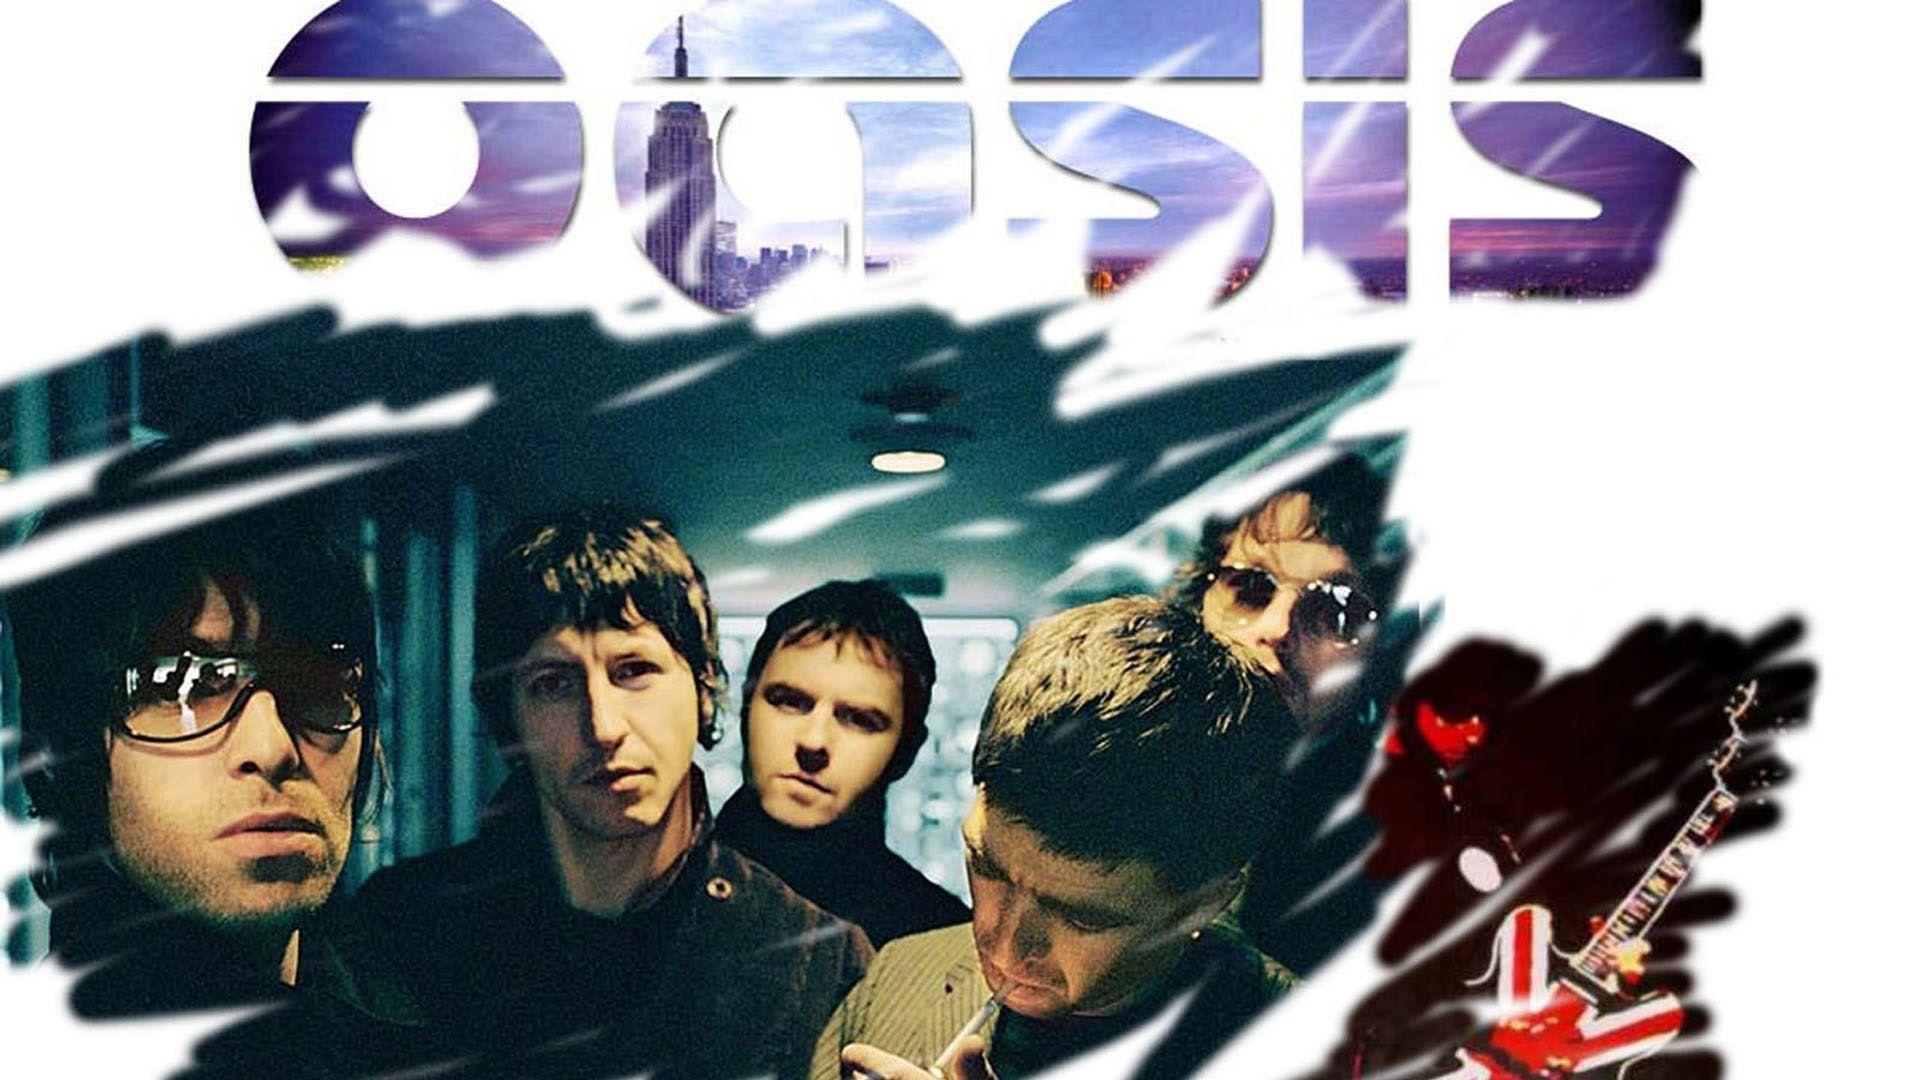 Liam Gallagher Oasis Wallpaper Hd Normal Band  फट शयर